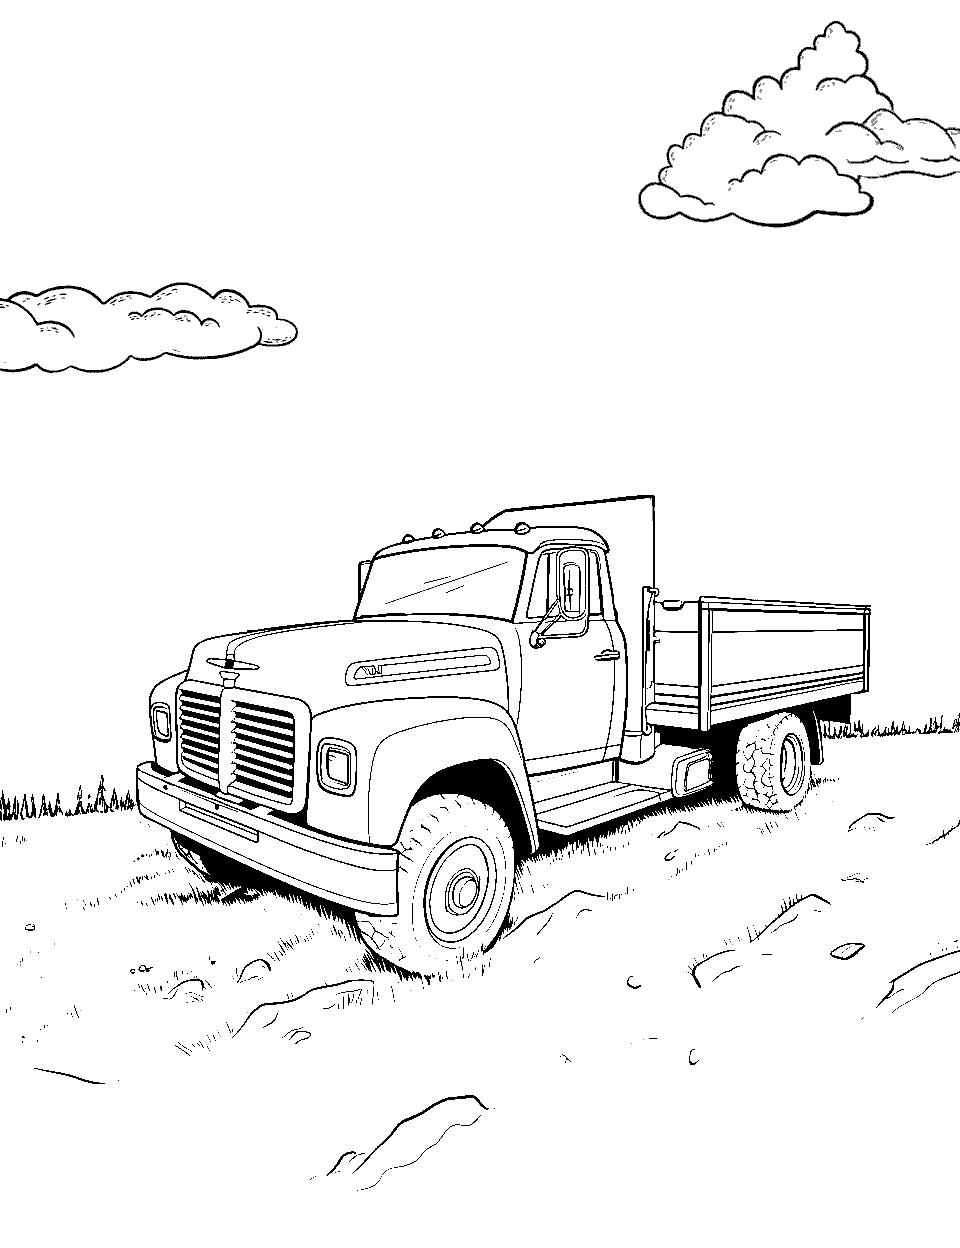 Quiet Moment Under the Sky Coloring Page - A truck parked in an open field, under the open sky.